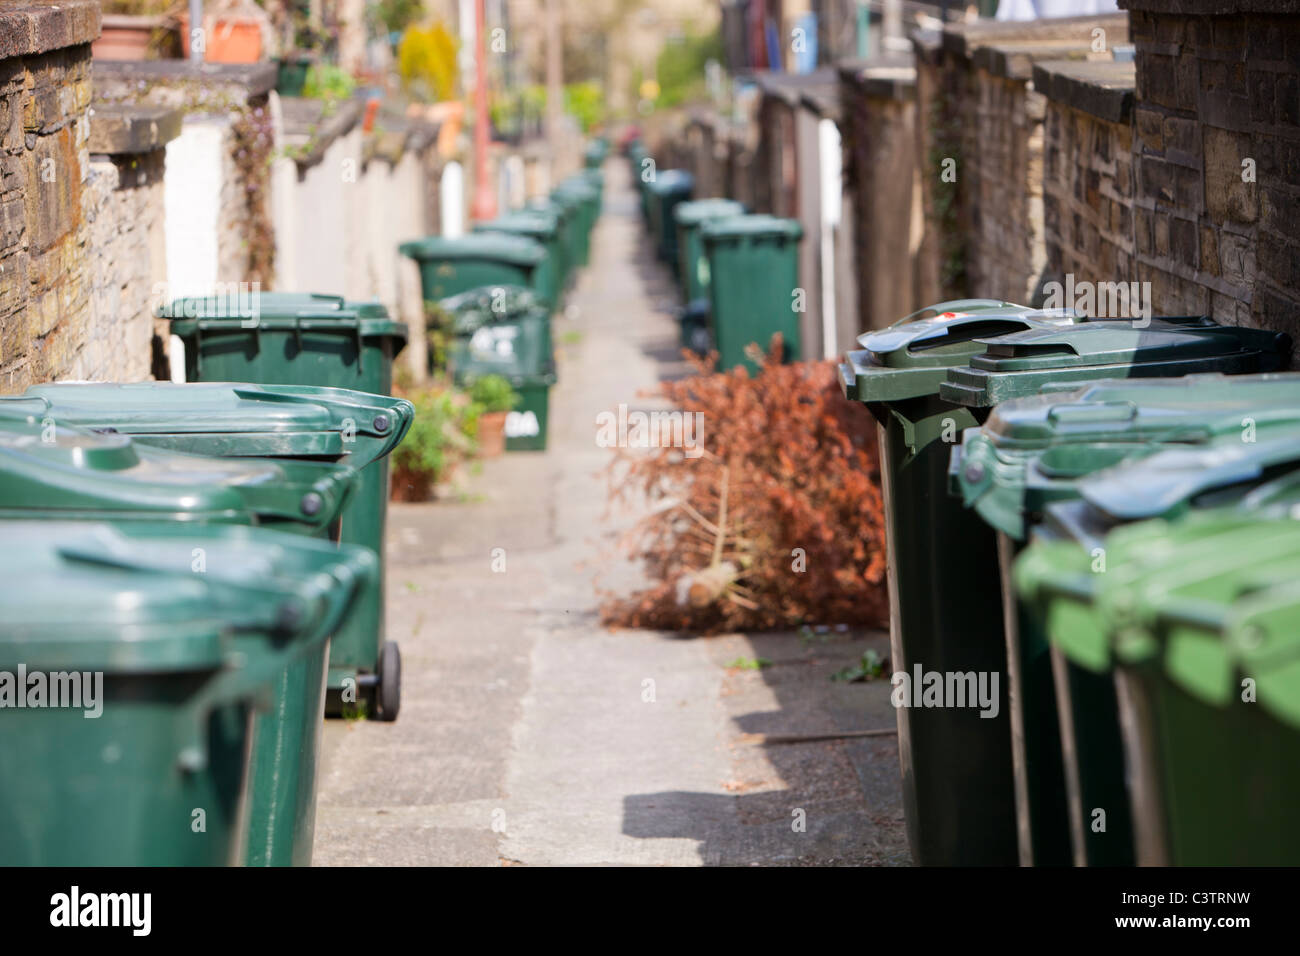 Rubbish bins on a back alley between terraced houses in Saltaire, Yorkshire, UK. Stock Photo